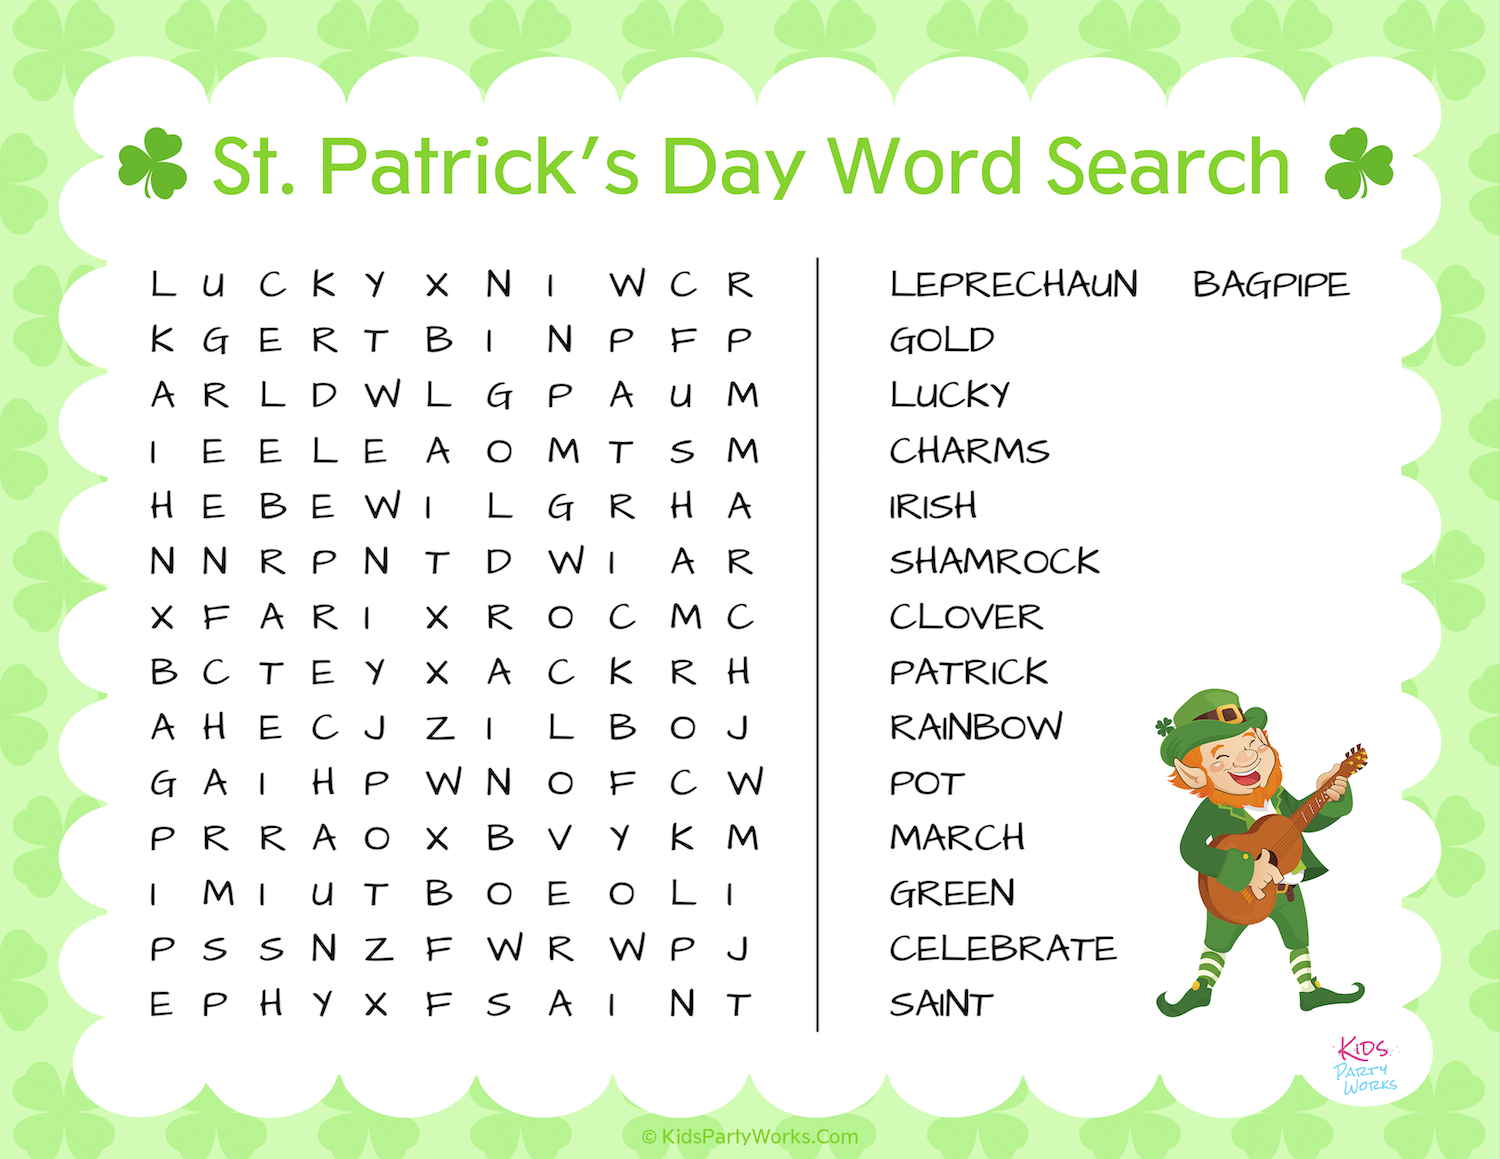 Free St. Patrick's Day Word Search. KidsPartyWorks.Com